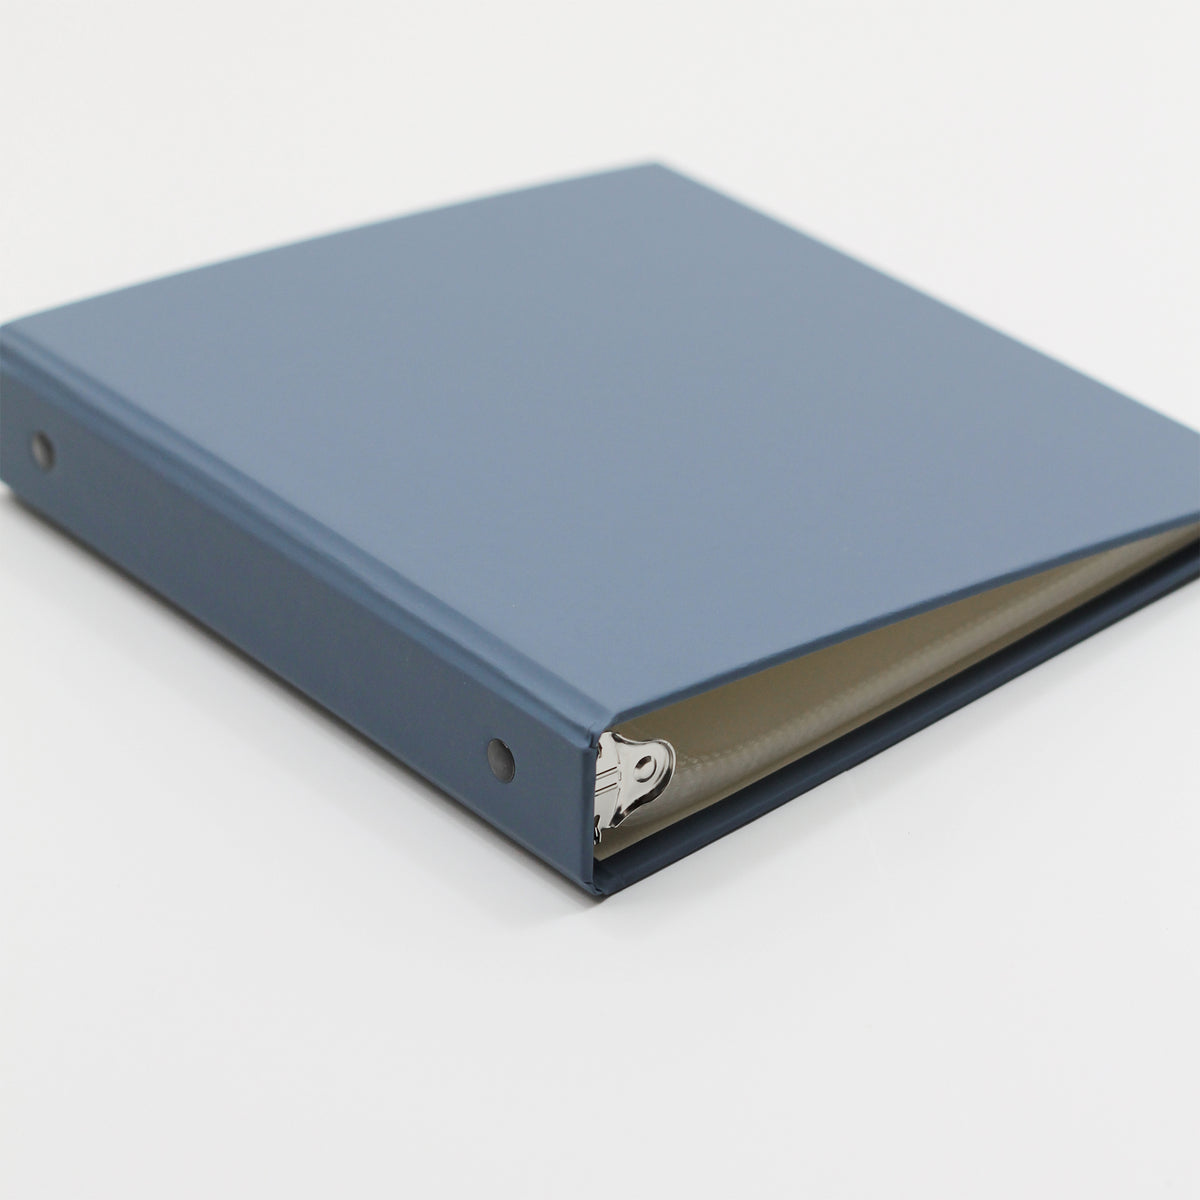 Medium Photo Binder For 4x6 Photos | Cover: Ocean Blue Vegan Leather | Available Personalized